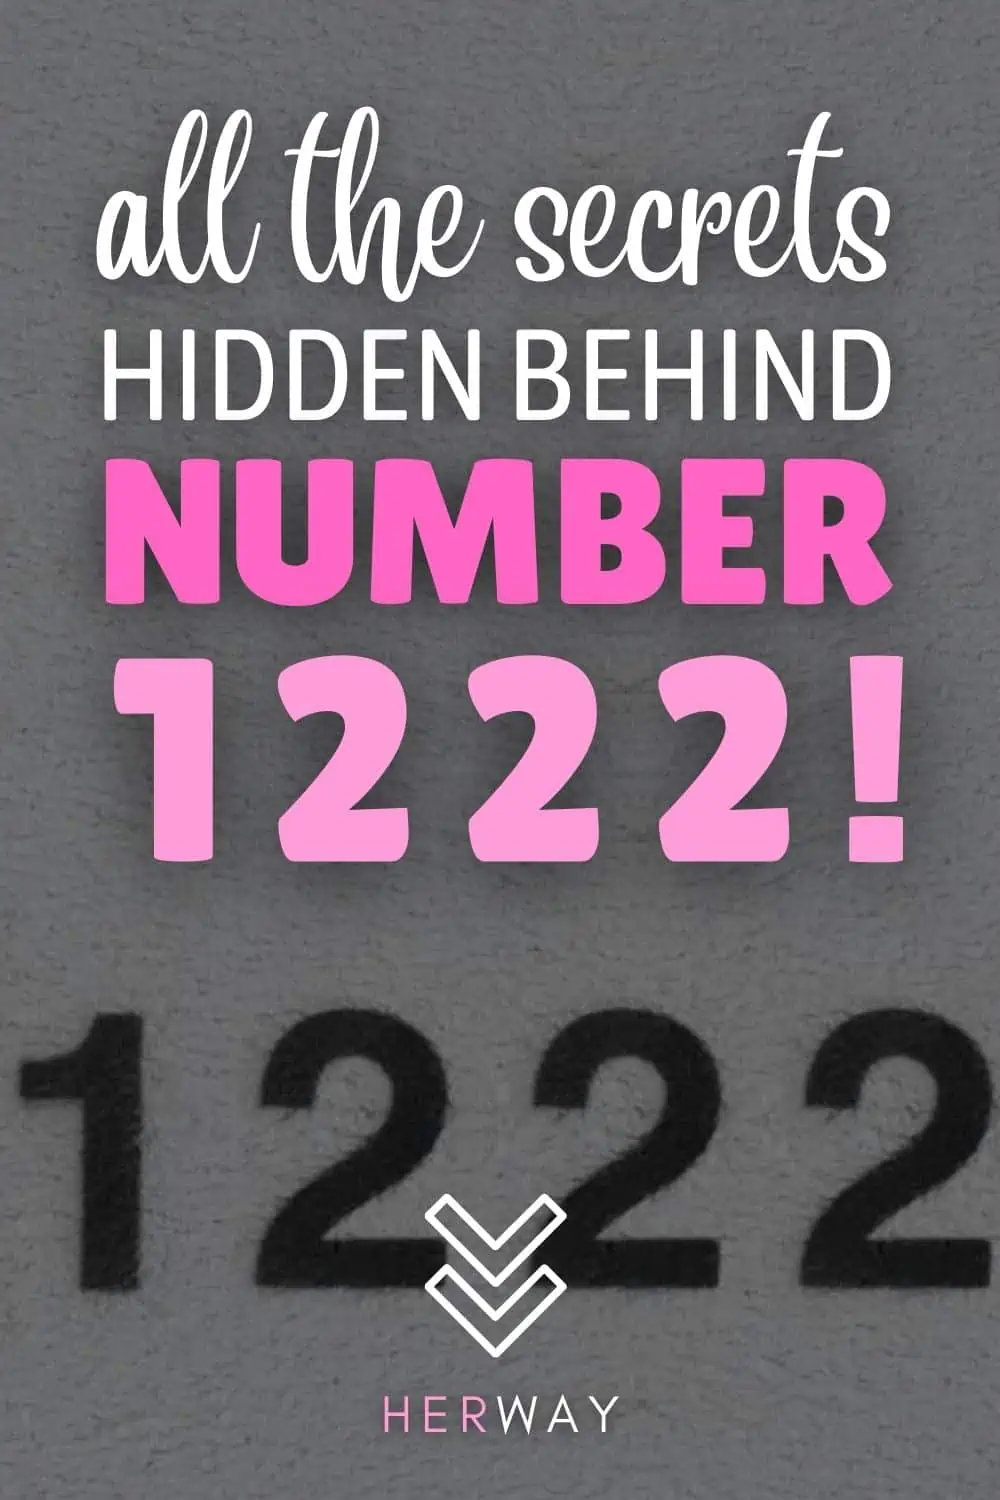 1222 Meaning Of Angel Number And 6 Reasons Why You Keep Seeing It Pinterest